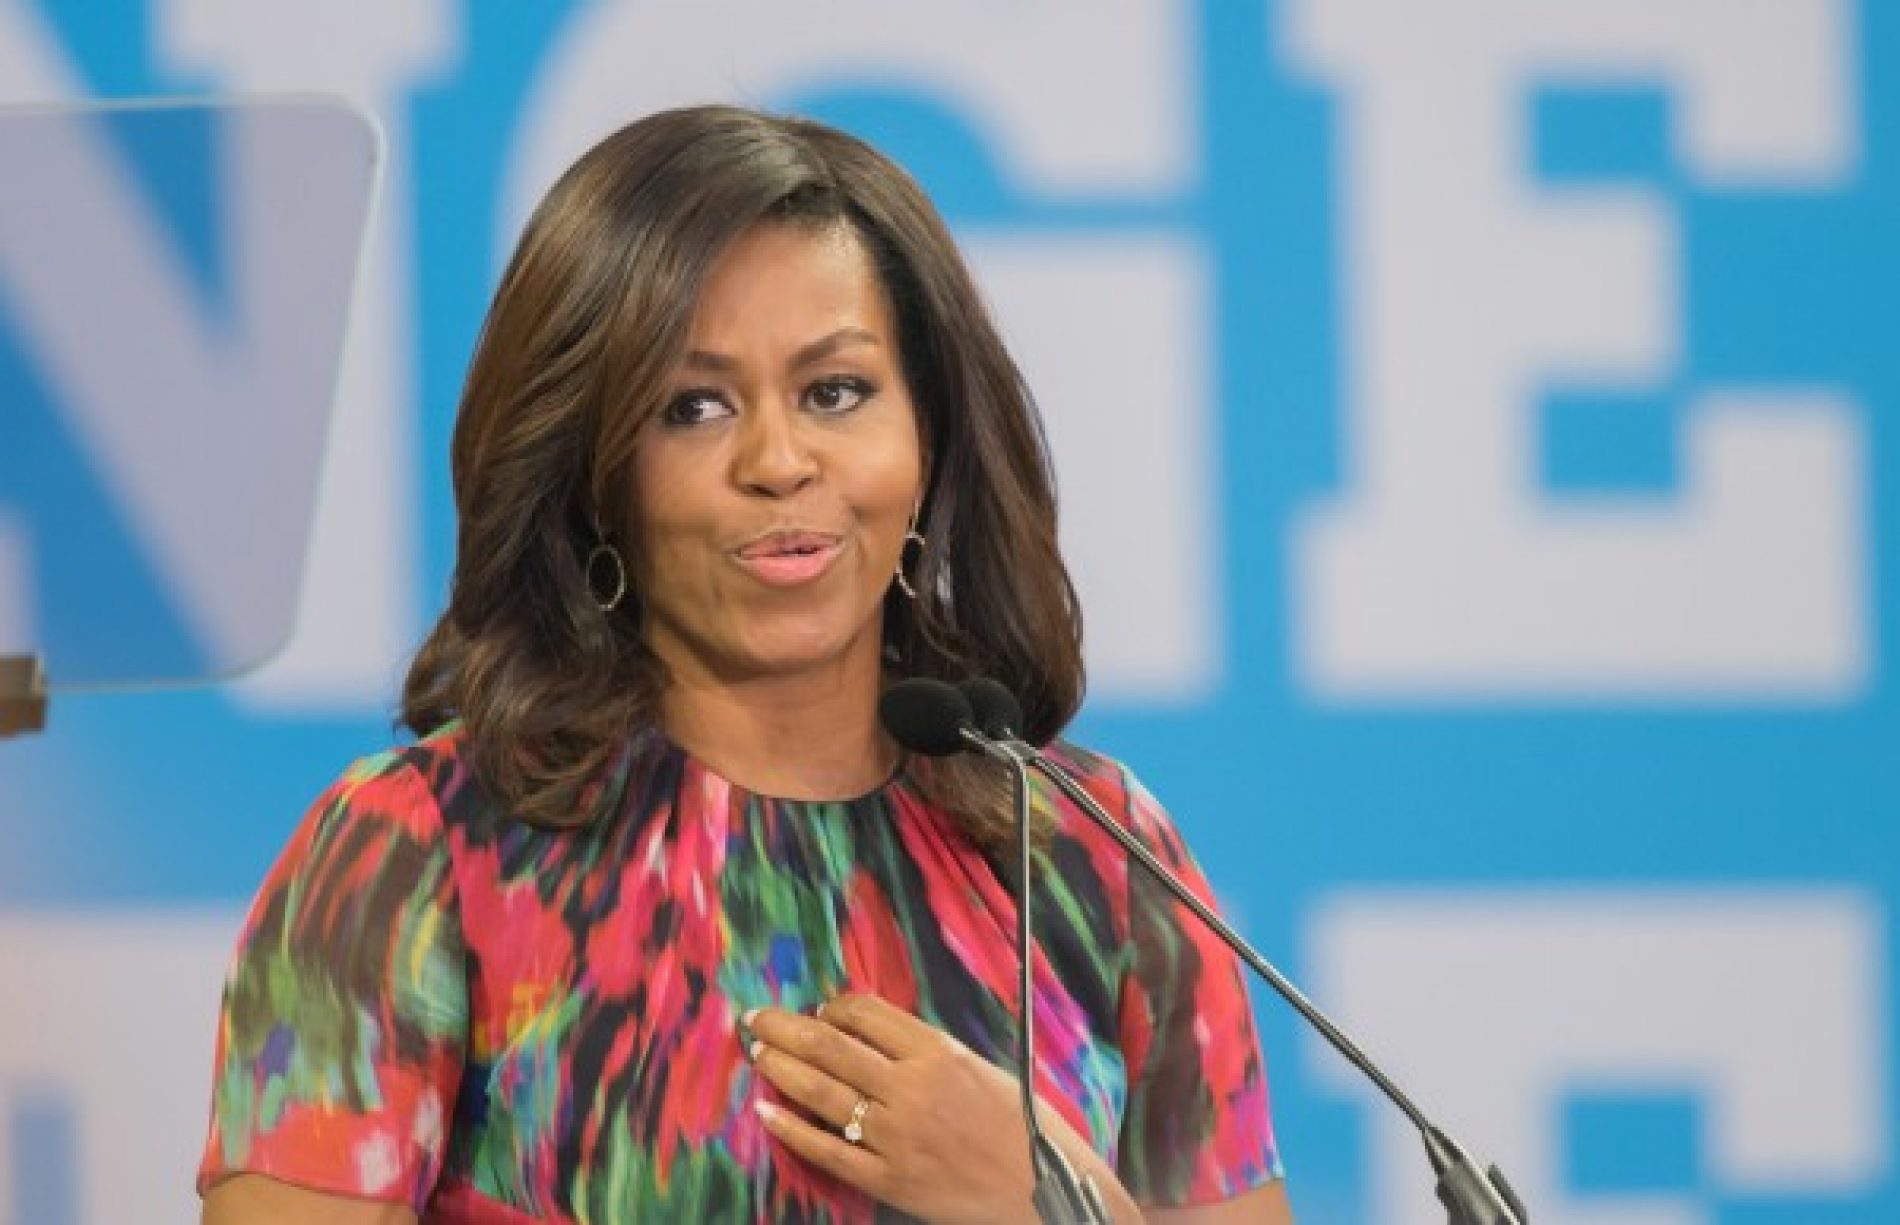 Michelle Obama Shared a Touching Story About the Night America Legalized Gay Marriage